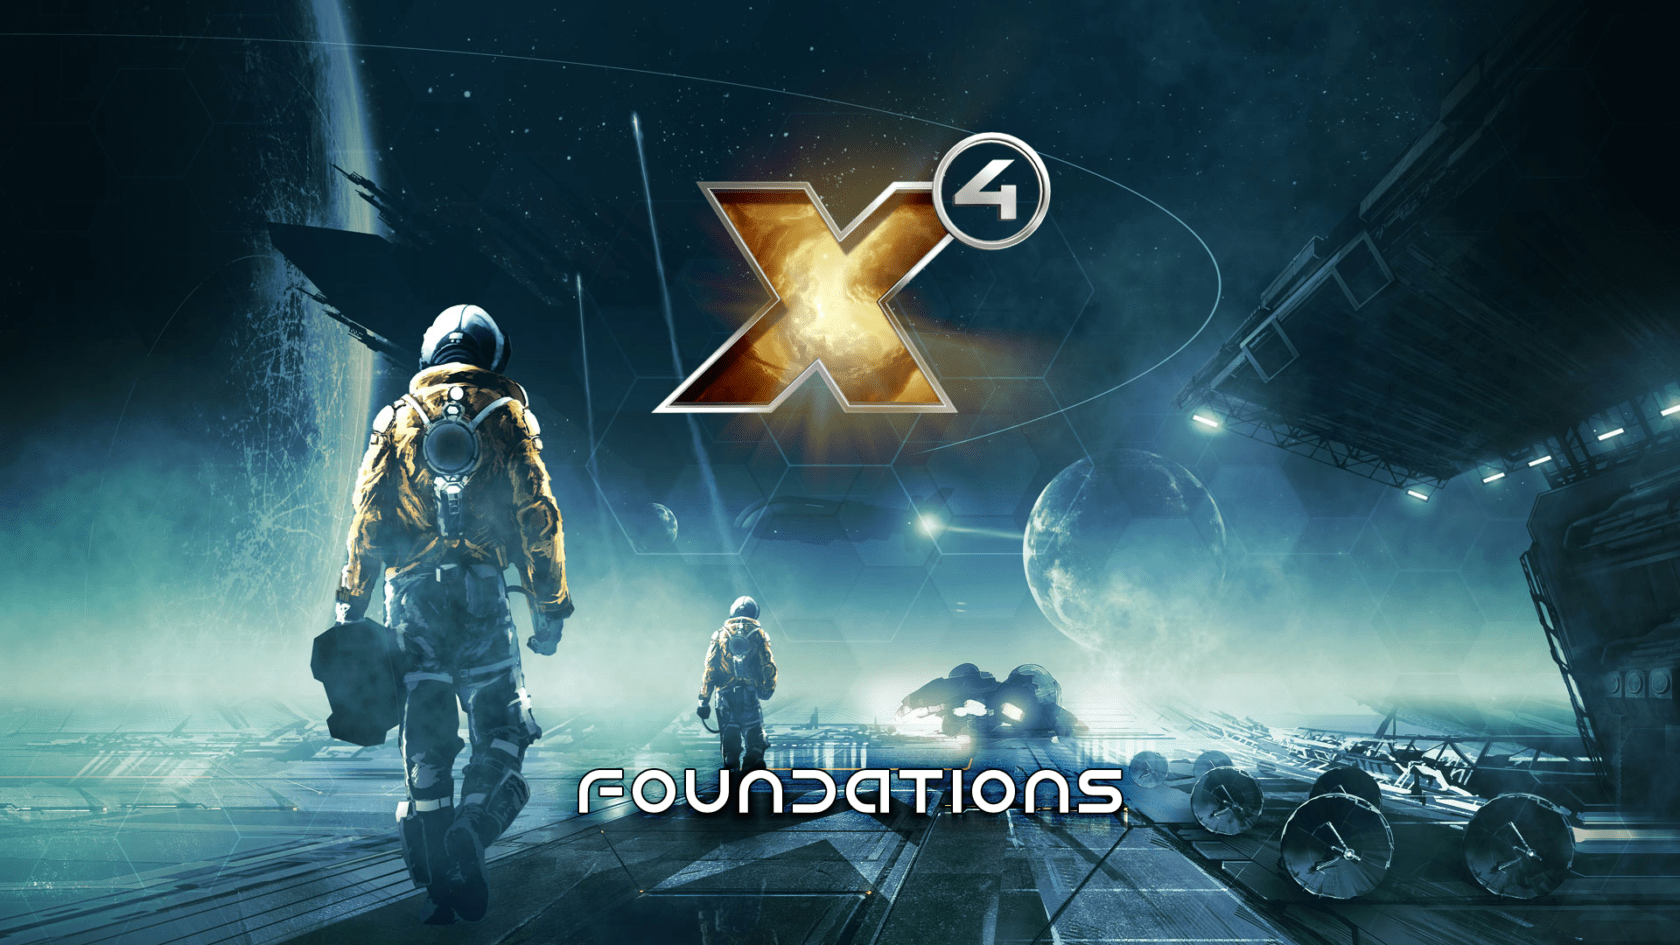 Download X4 Foundations Cradle of Humanity MULTi13-PLAZA